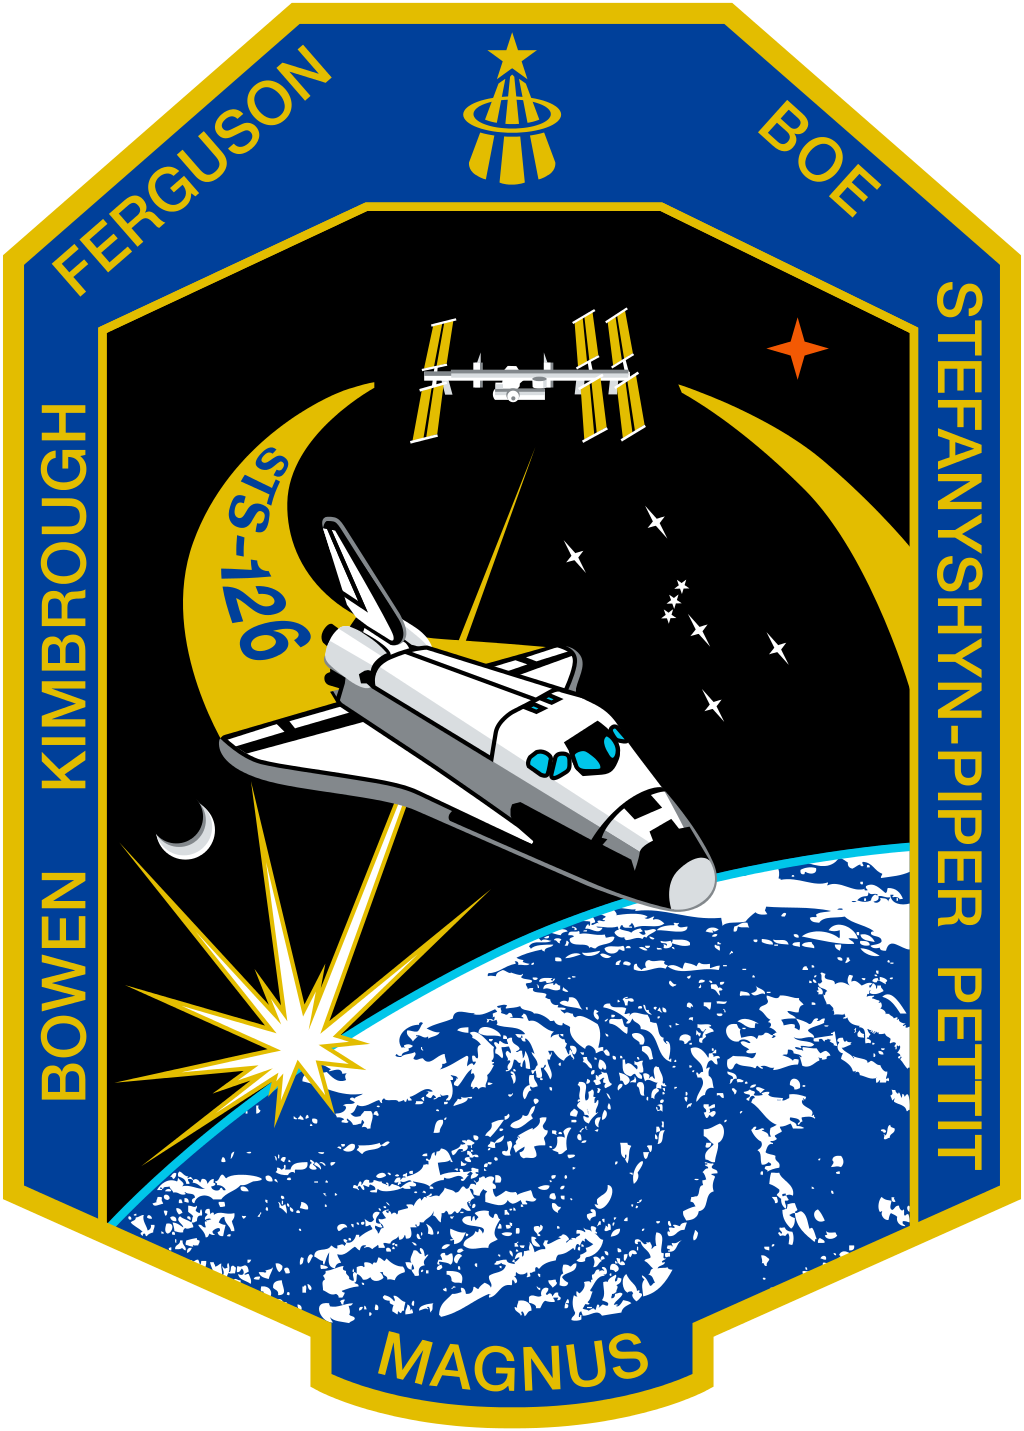 Mission patch for STS-126